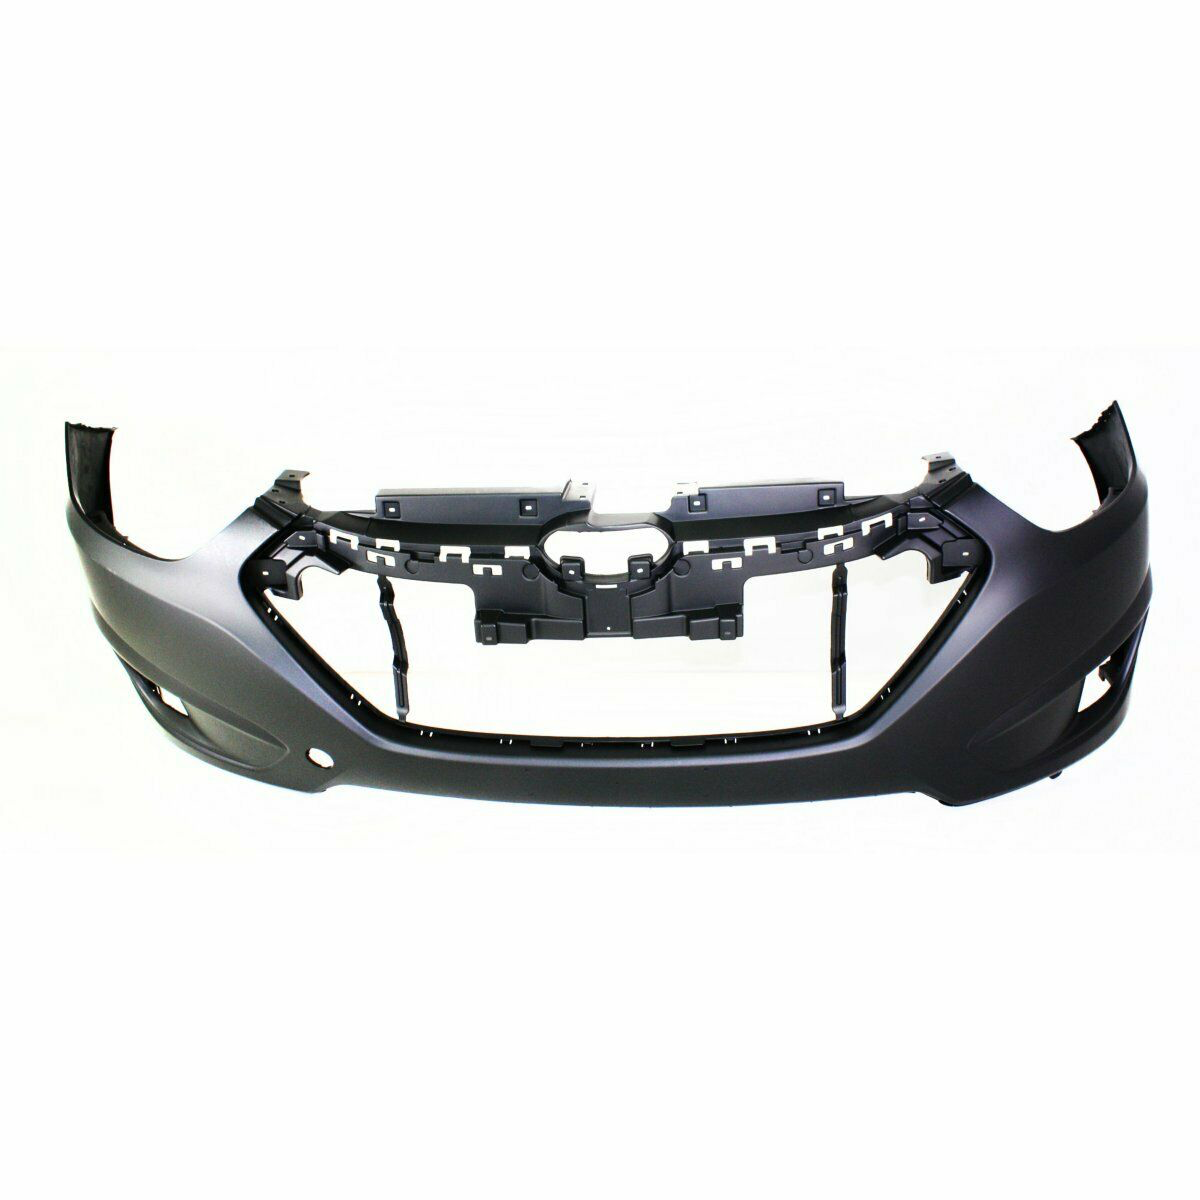 2010-2013 Hyundai Tucson Front Bumper Painted to Match